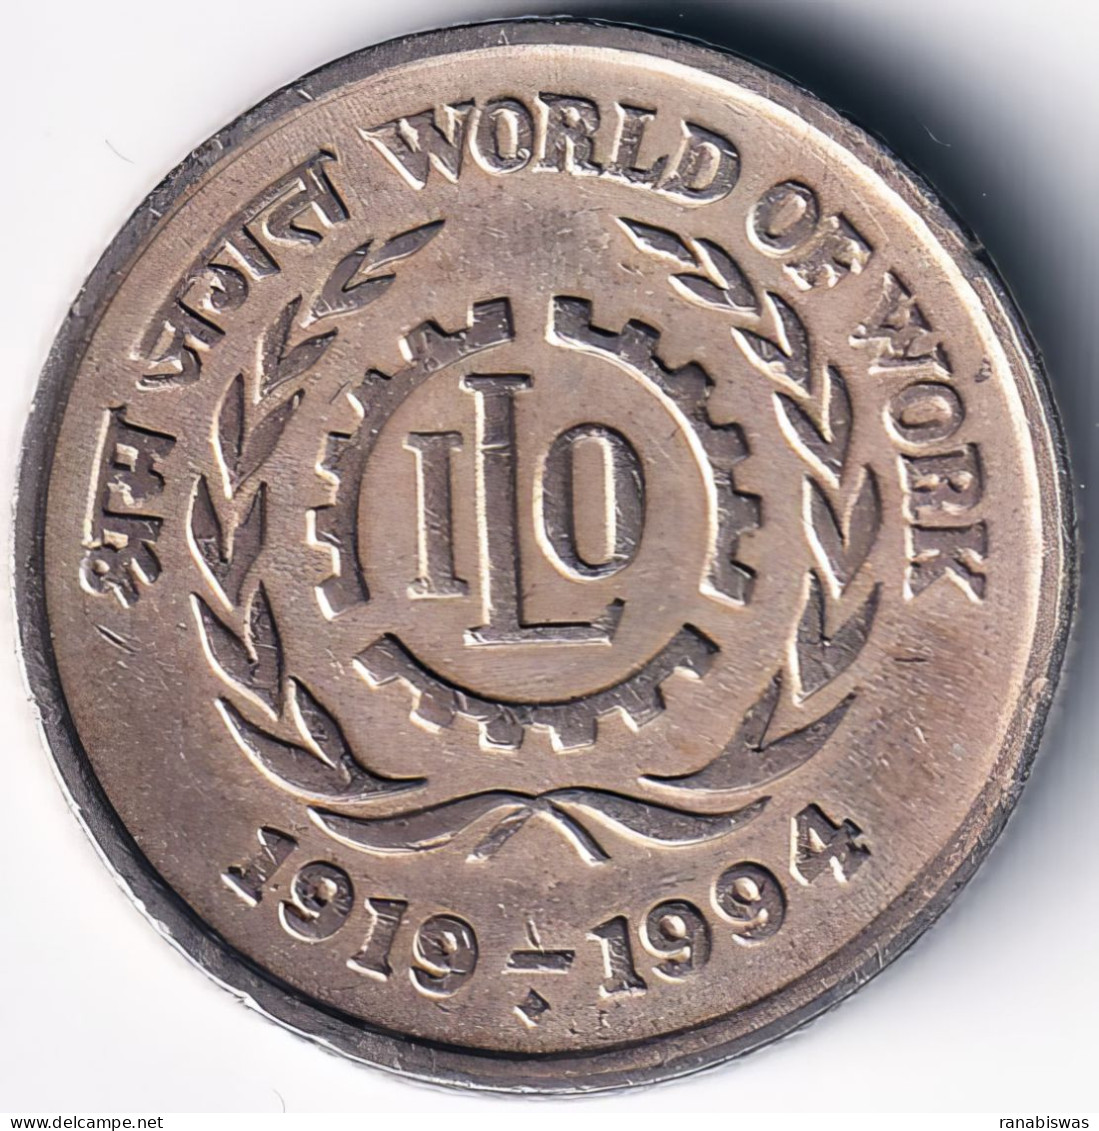 INDIA COIN LOT 131, 5 RUPEES 1994, WORLD OF WORK, ILO, BOMBAY MINT, XF - India